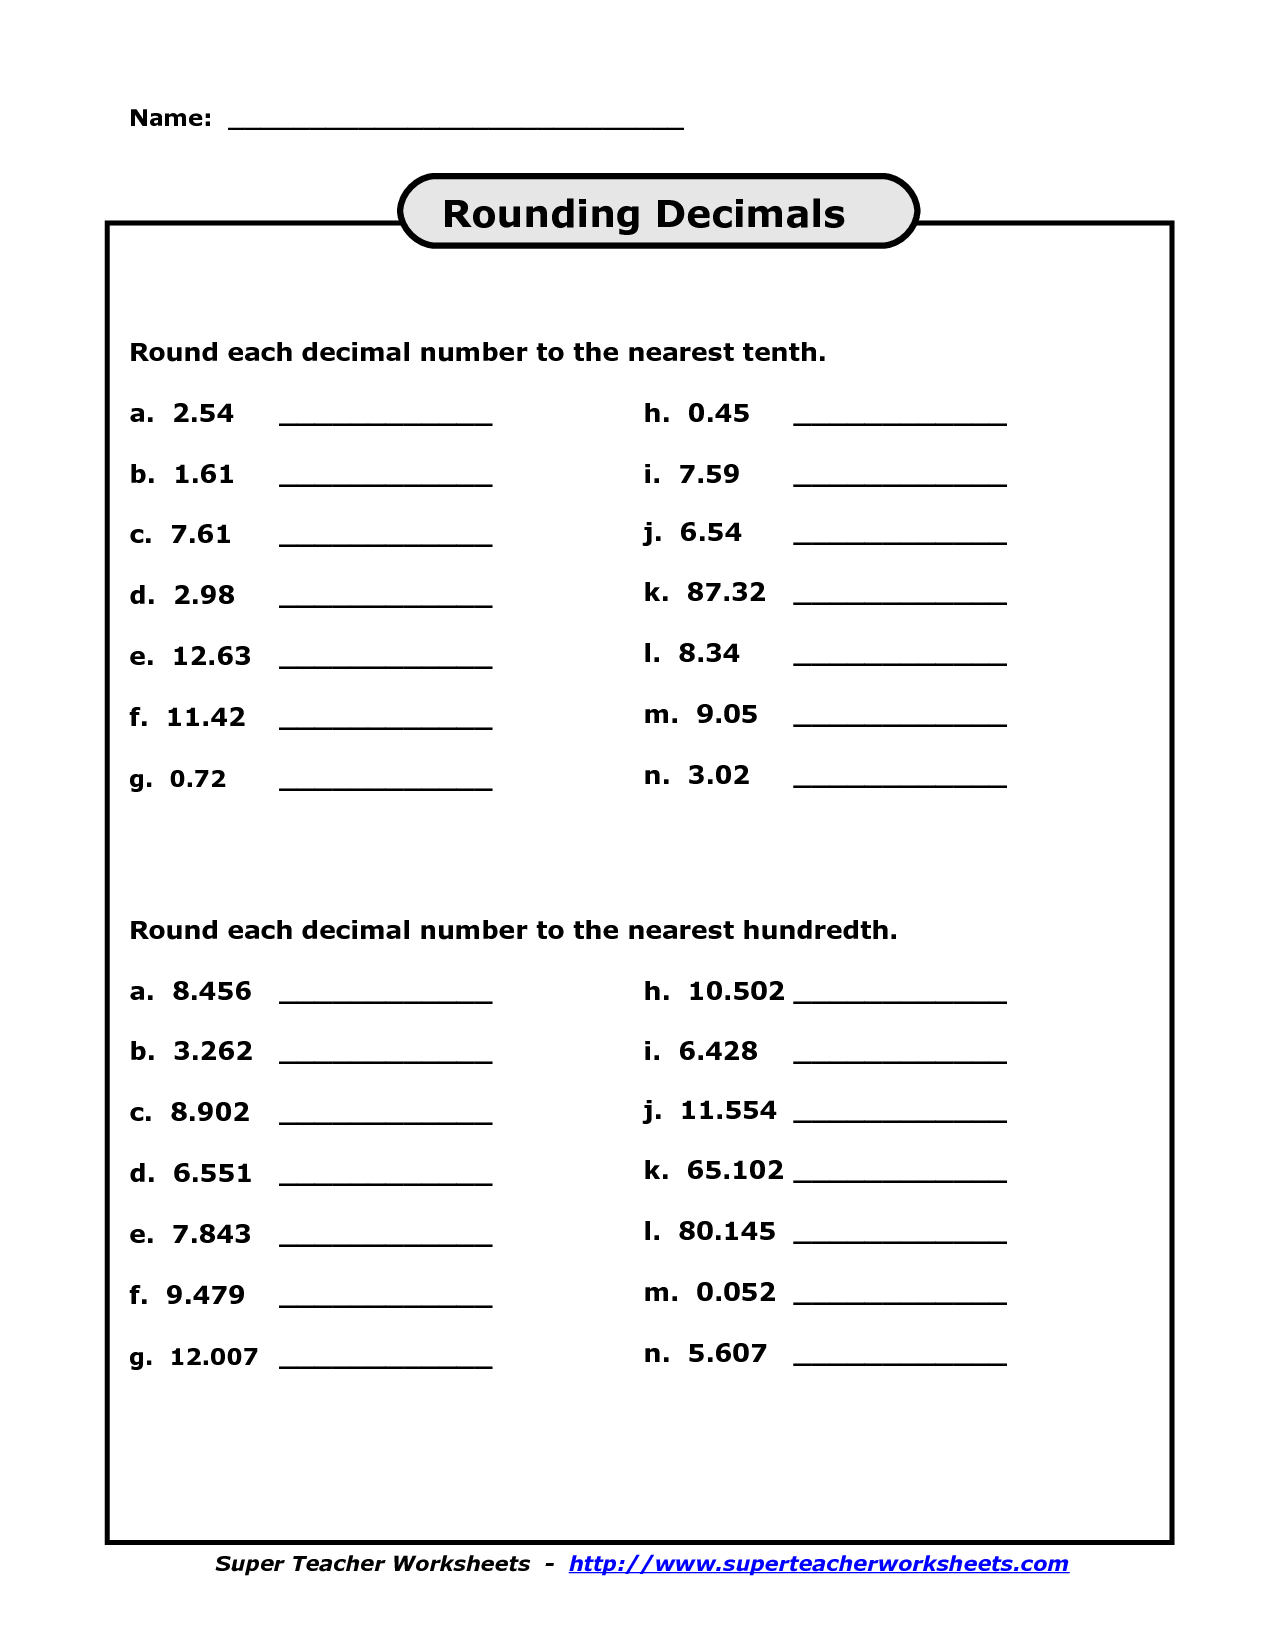 9-best-images-of-rounding-decimal-numbers-worksheets-rounding